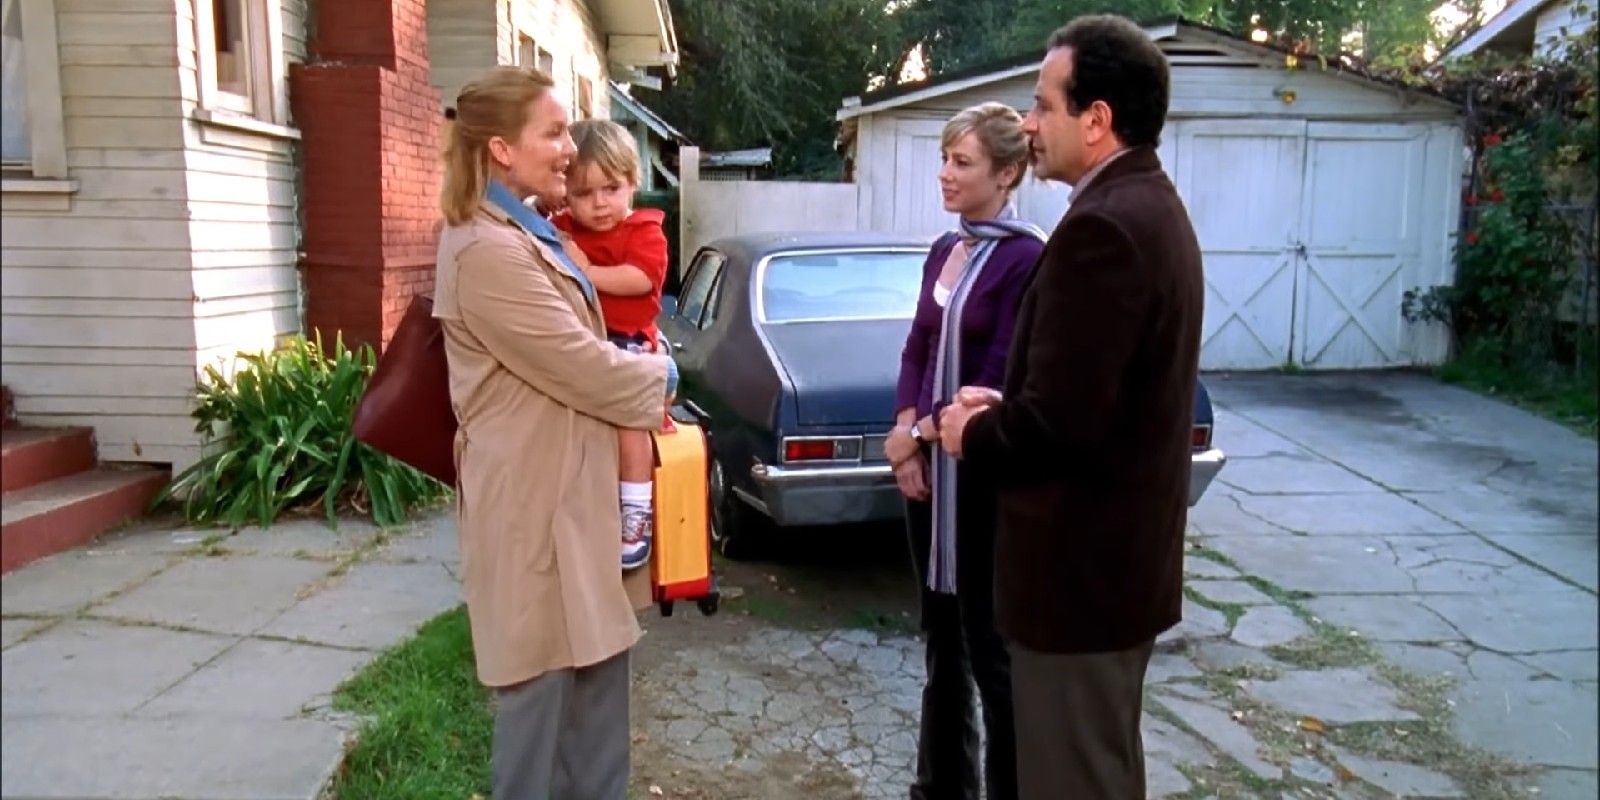 A woman carries a child while speaking with Natalie and Monk in Monk